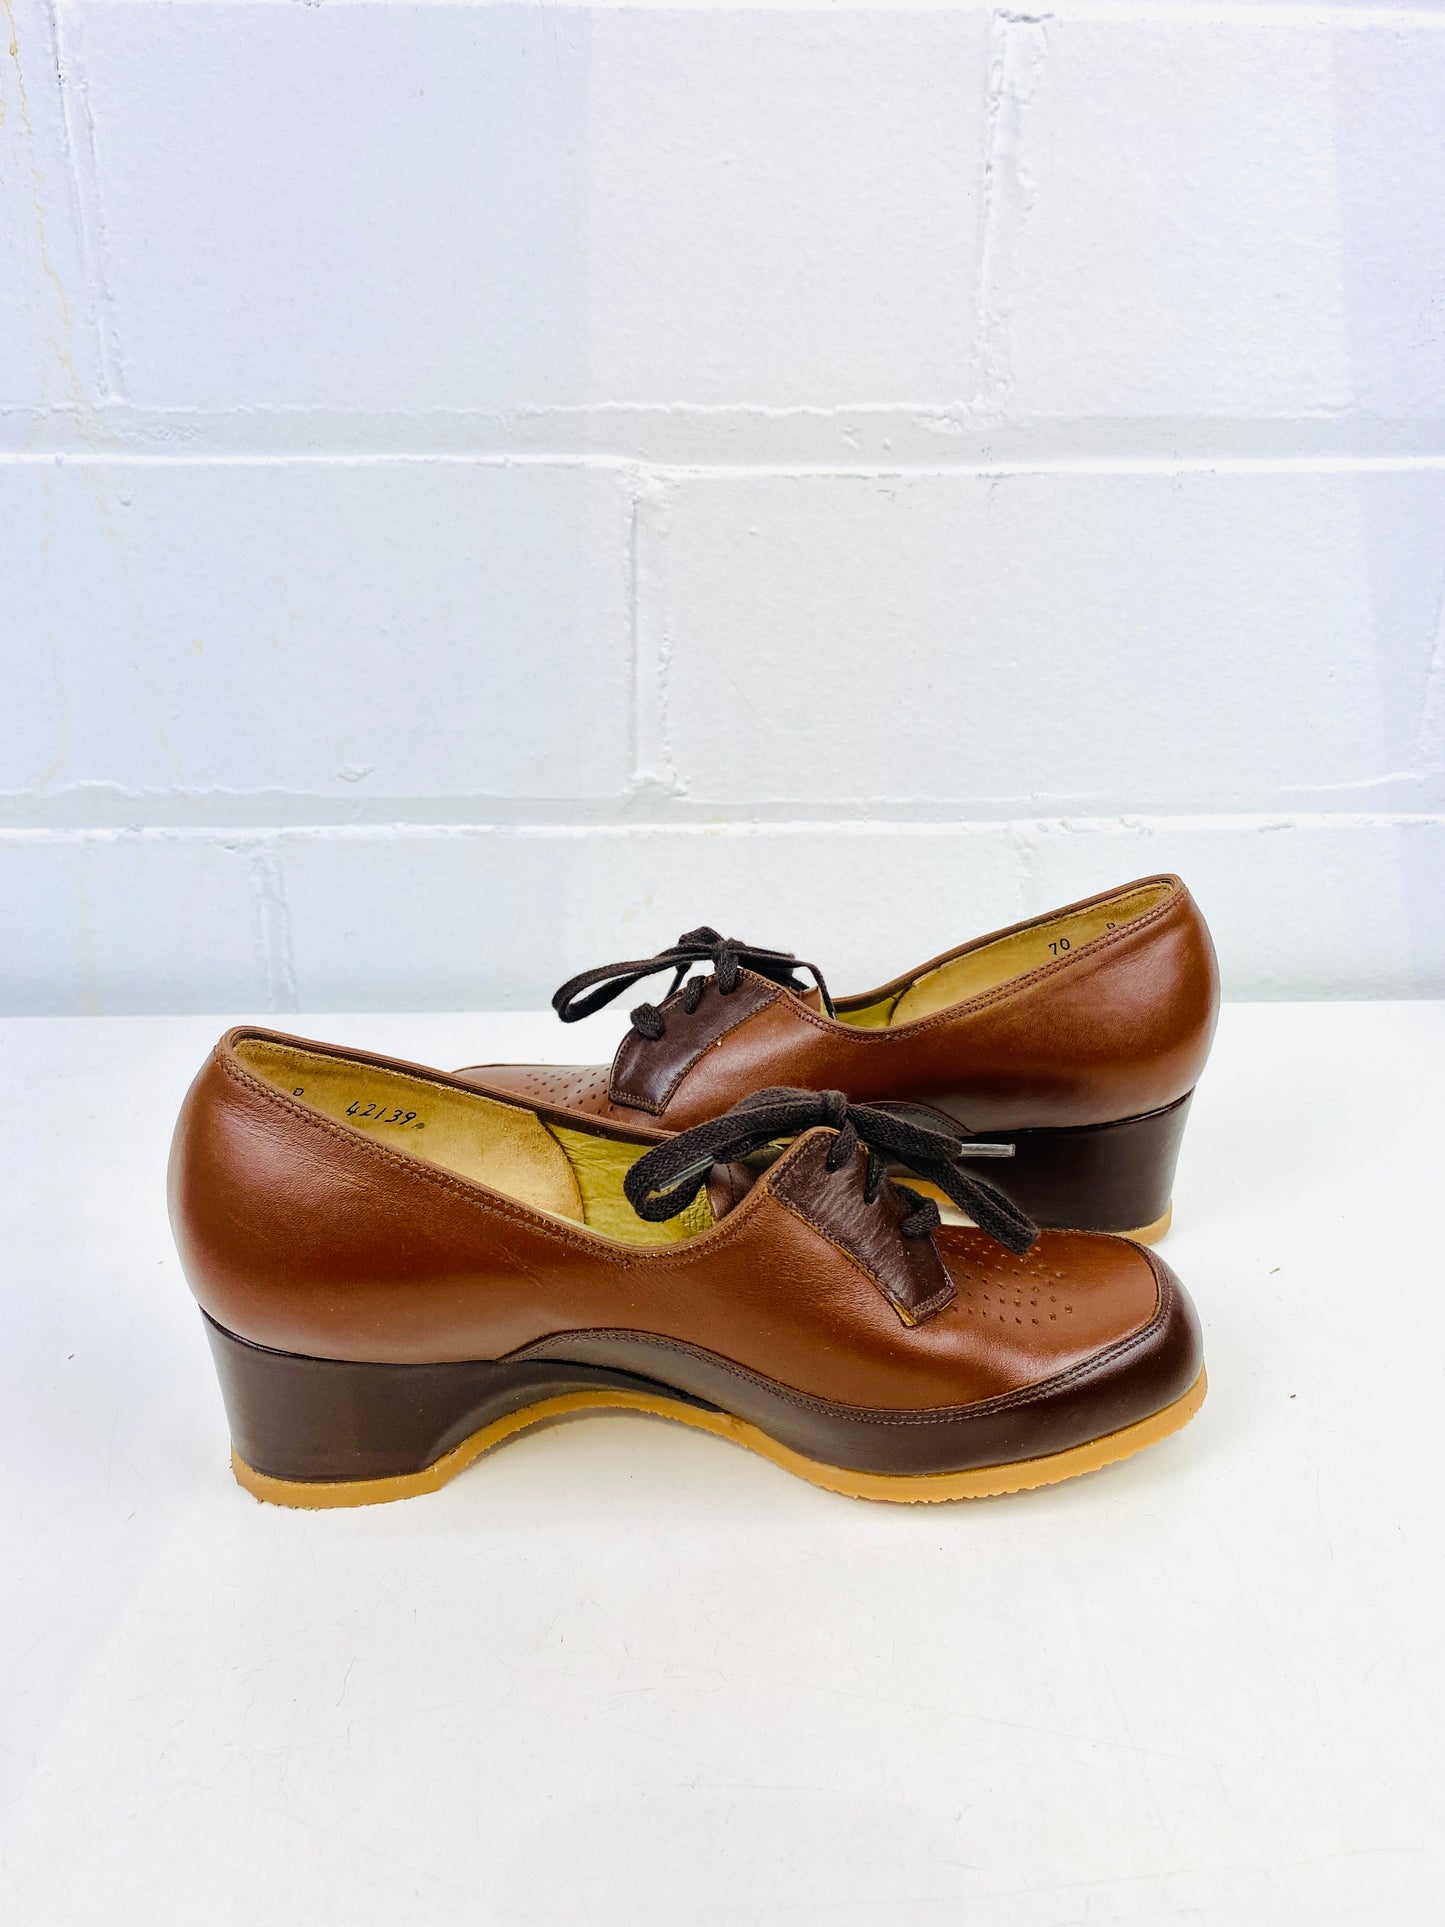 Vintage Deadstock Shoes, Women's 1980s Brown Leather Wedge Heel Oxfords, NOS, 8080